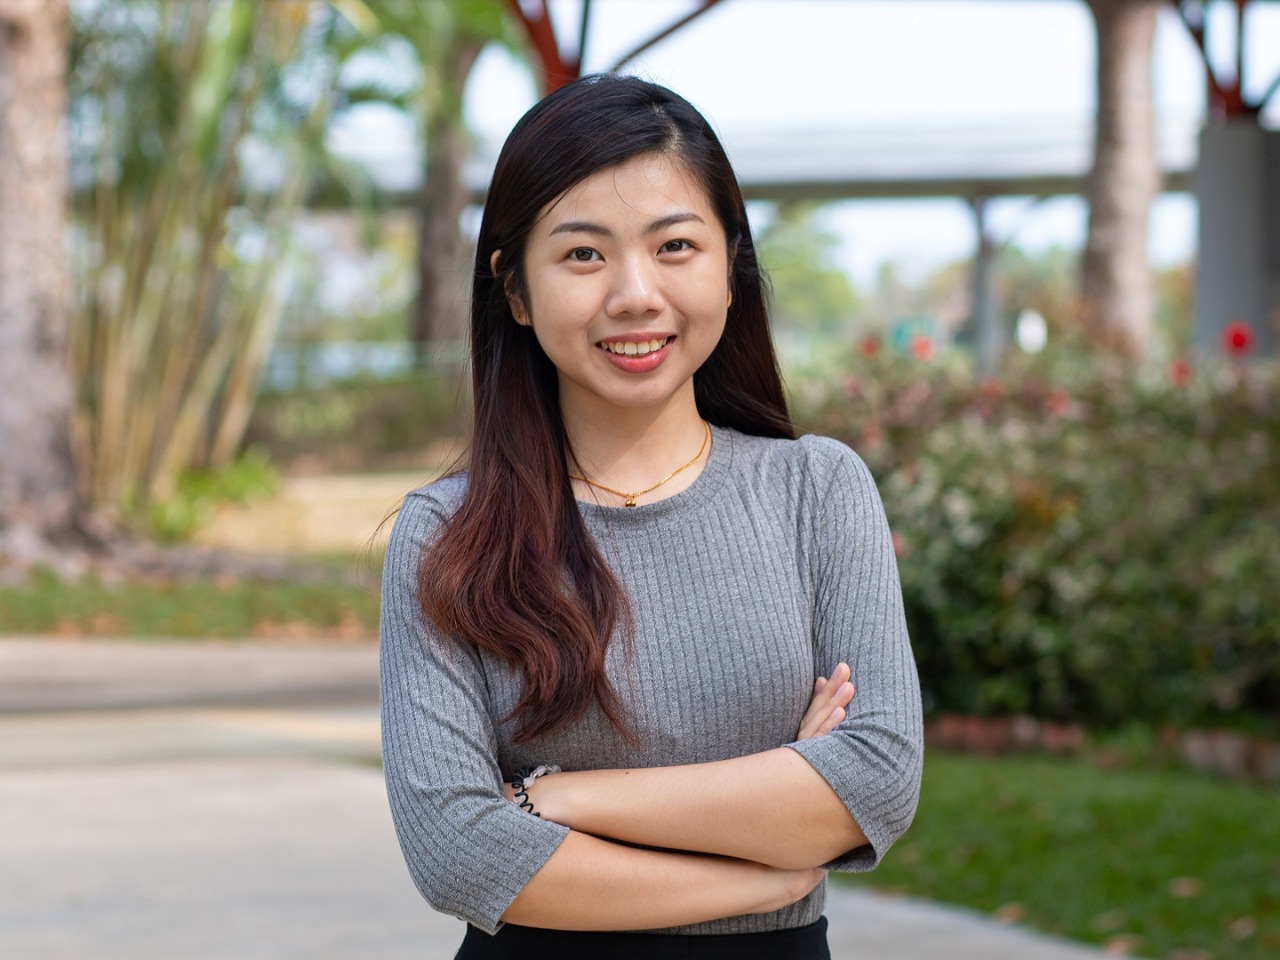 “People often ask me why I chose to pursue my studies at Curtin Malaysia. The first thing I would say is that is it’s the nearest foreign university campus to my hometown, Kota Kinabalu, Sabah. Curtin Malaysia offers an Australian education which is...